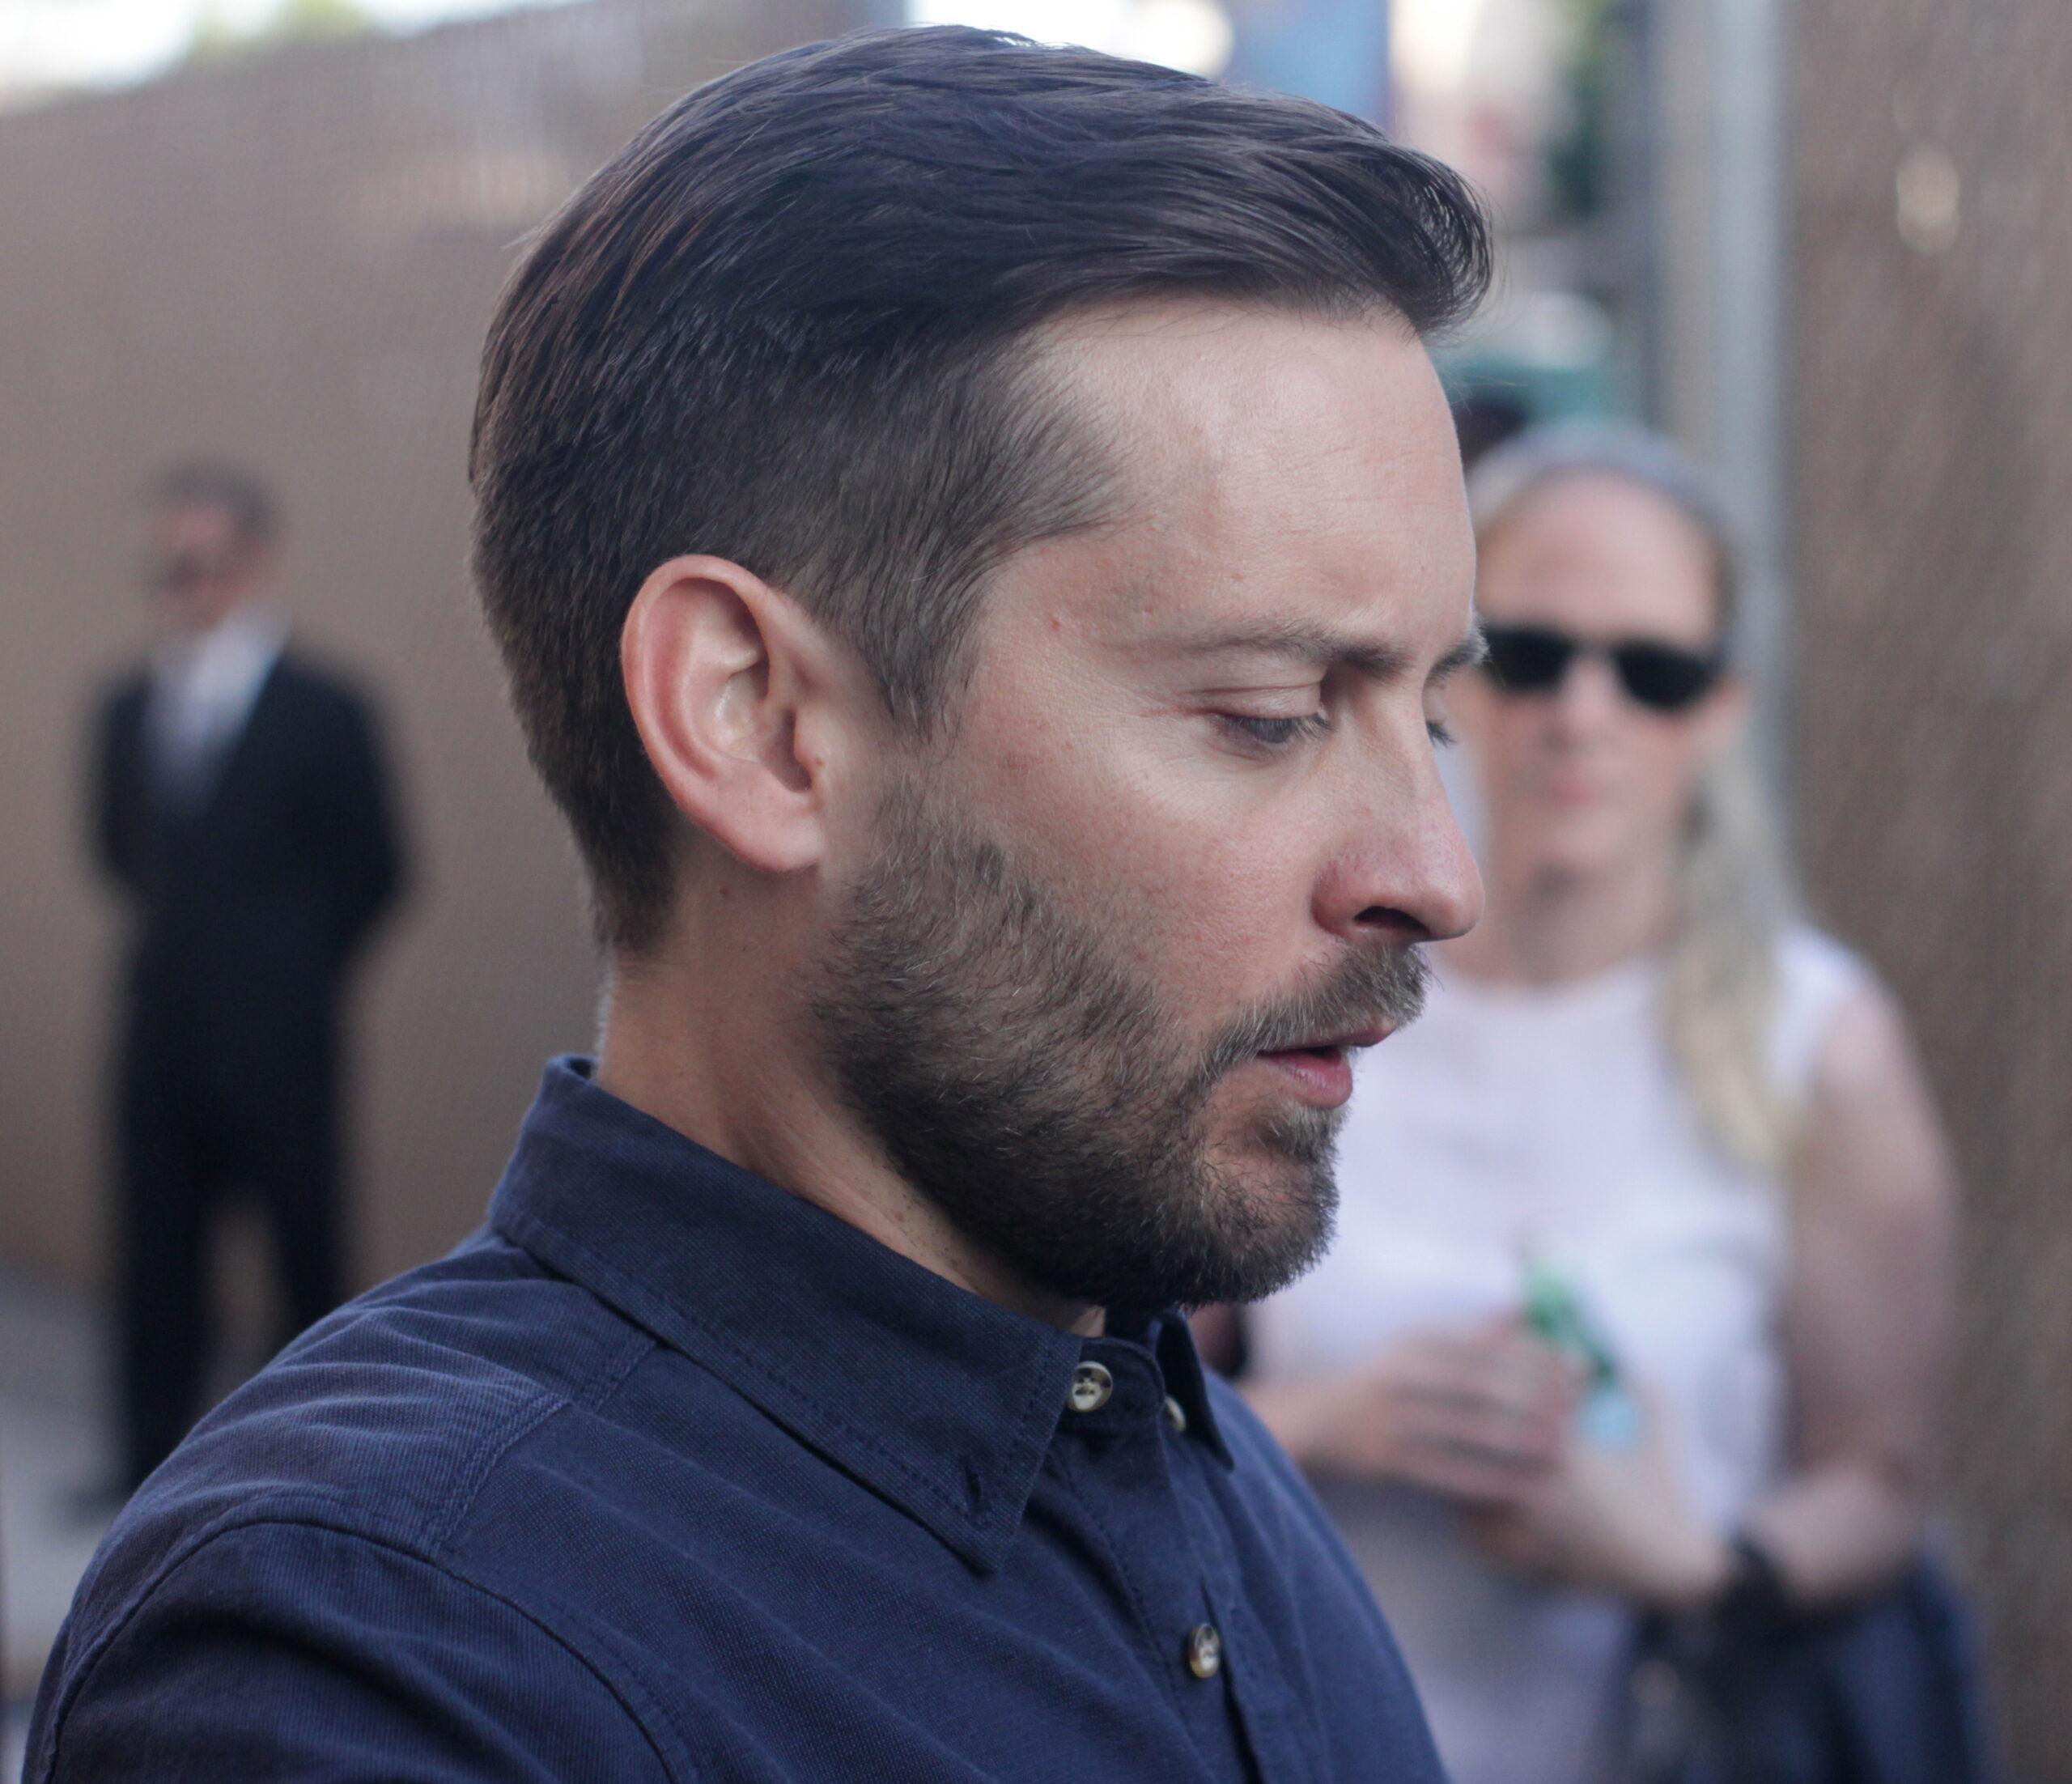 Tobey Maguire leaves the 'Jimmy Kimmel Live!' studios